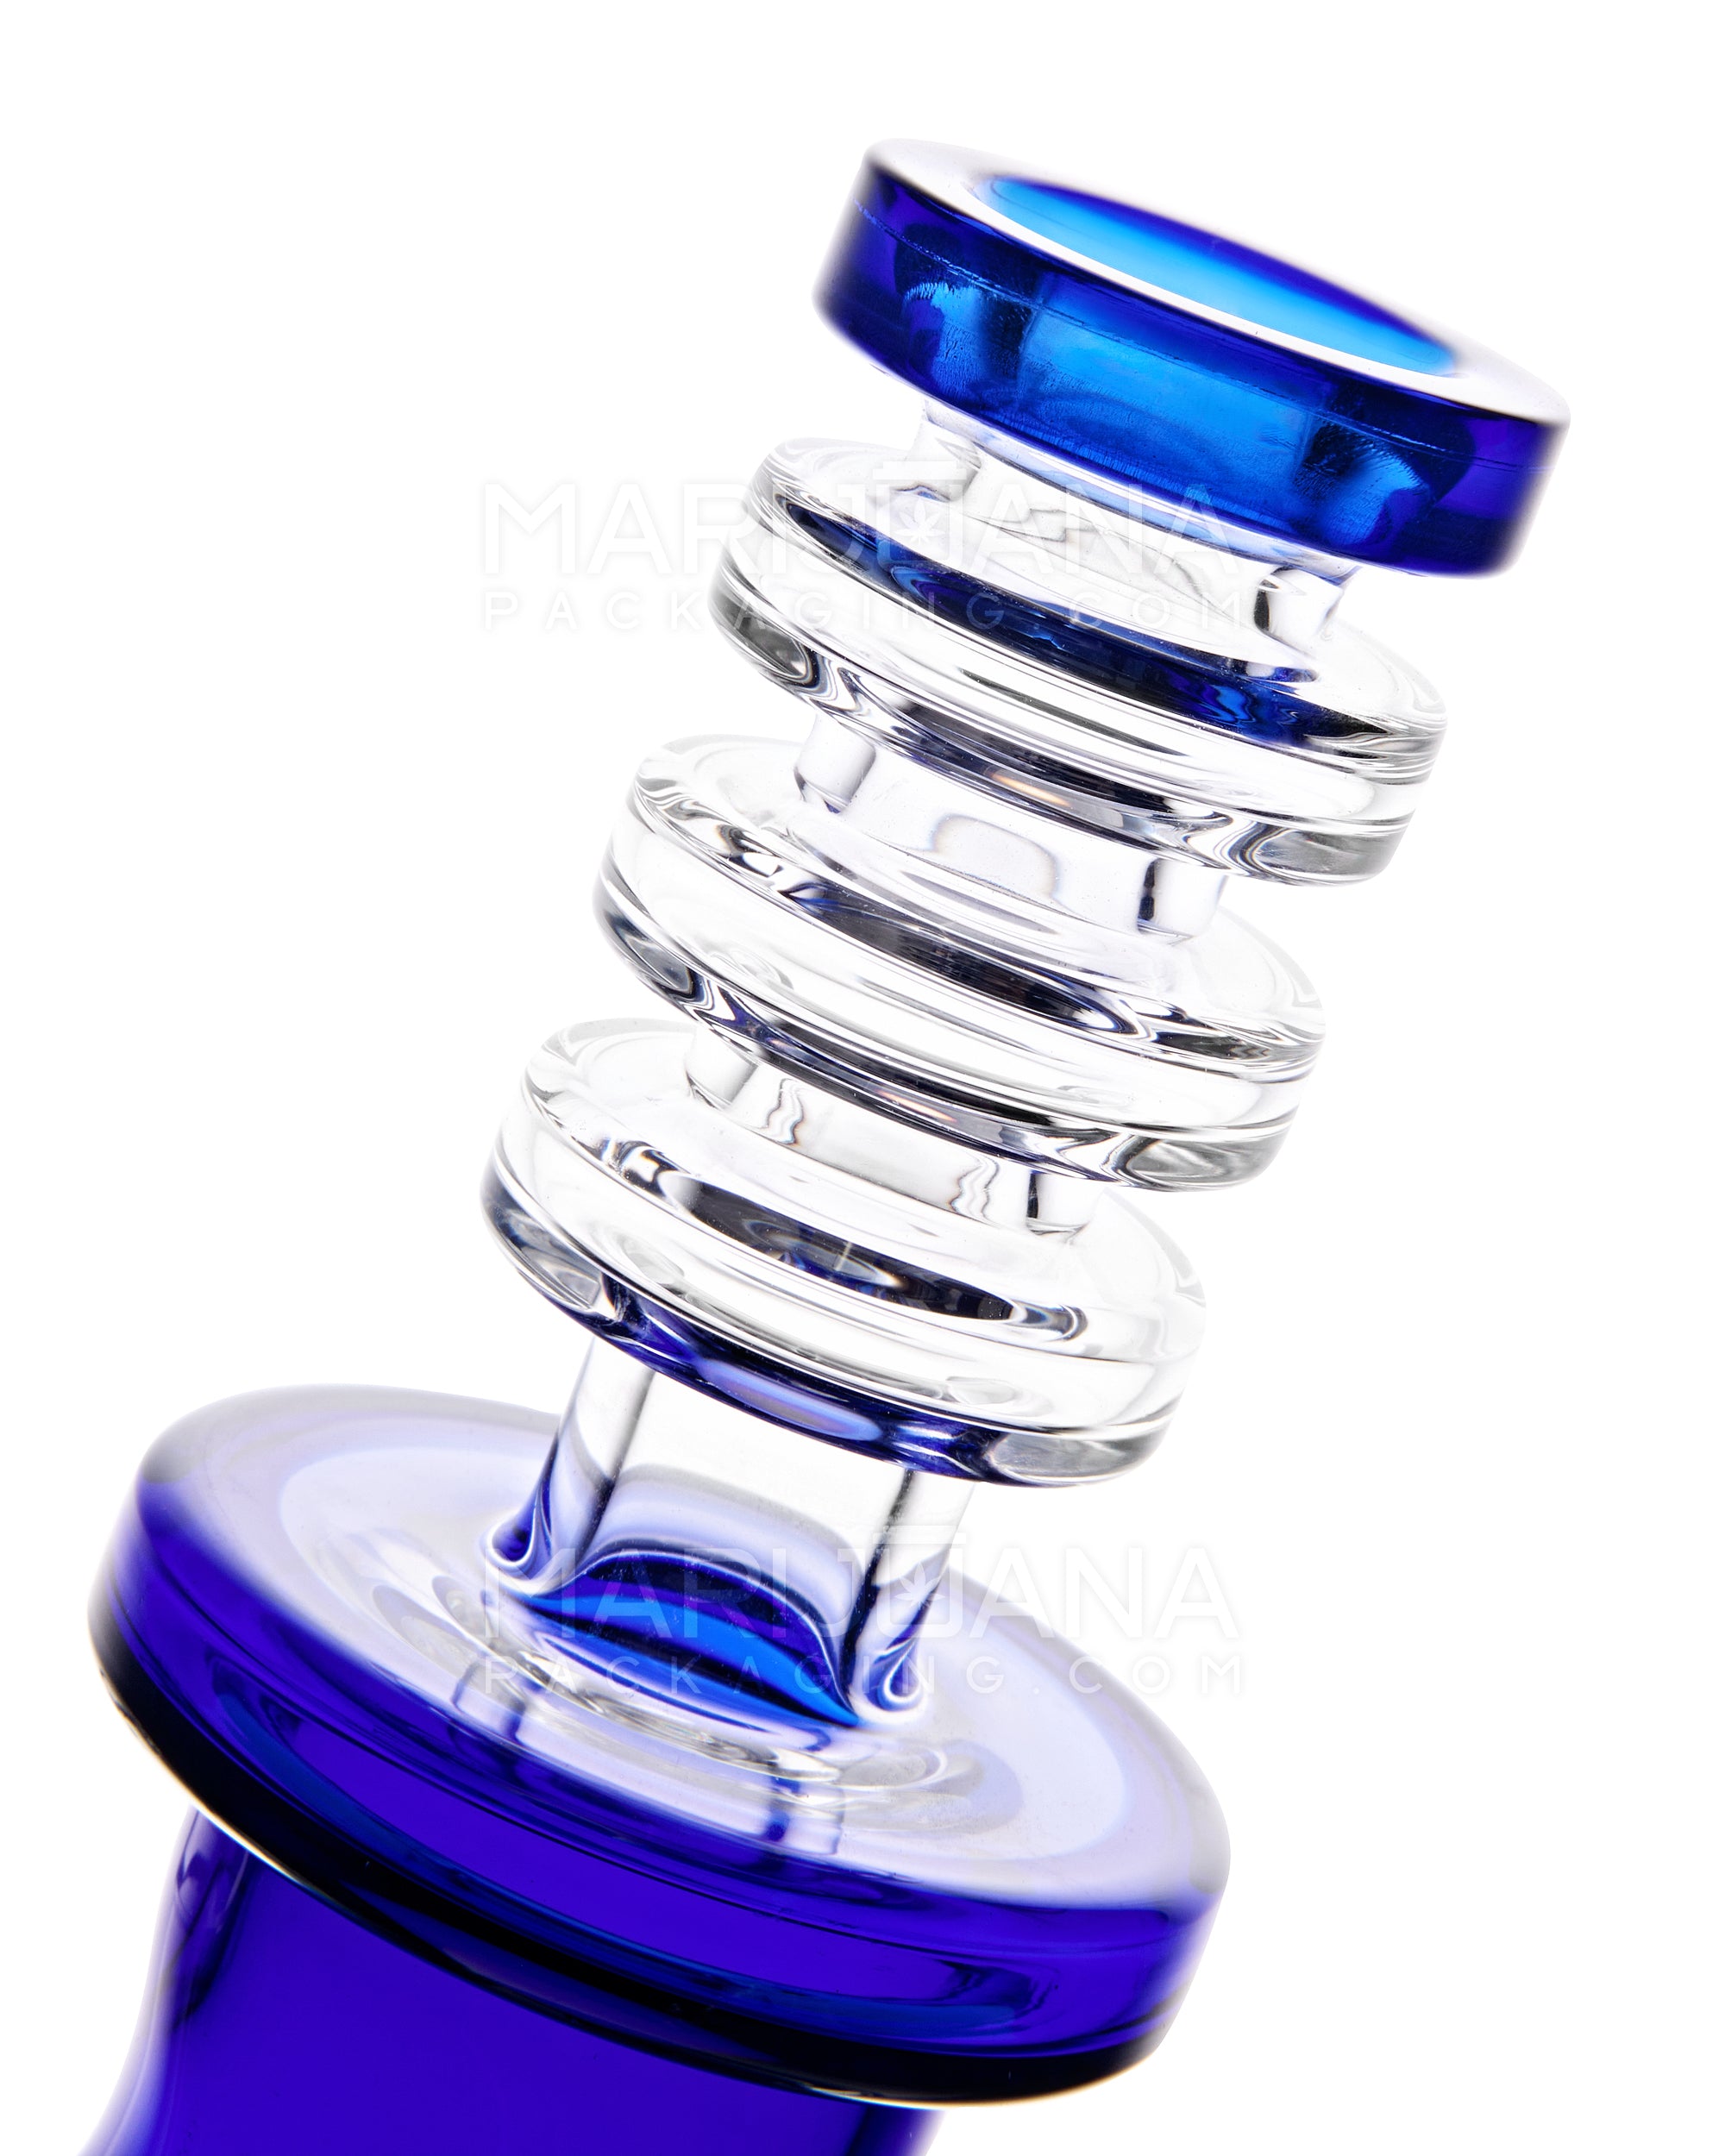 Bent Neck Ringed Triple Glass Water Pipe w/ Thick Base | 6.5in Tall - 14mm Bowl - Blue - 5